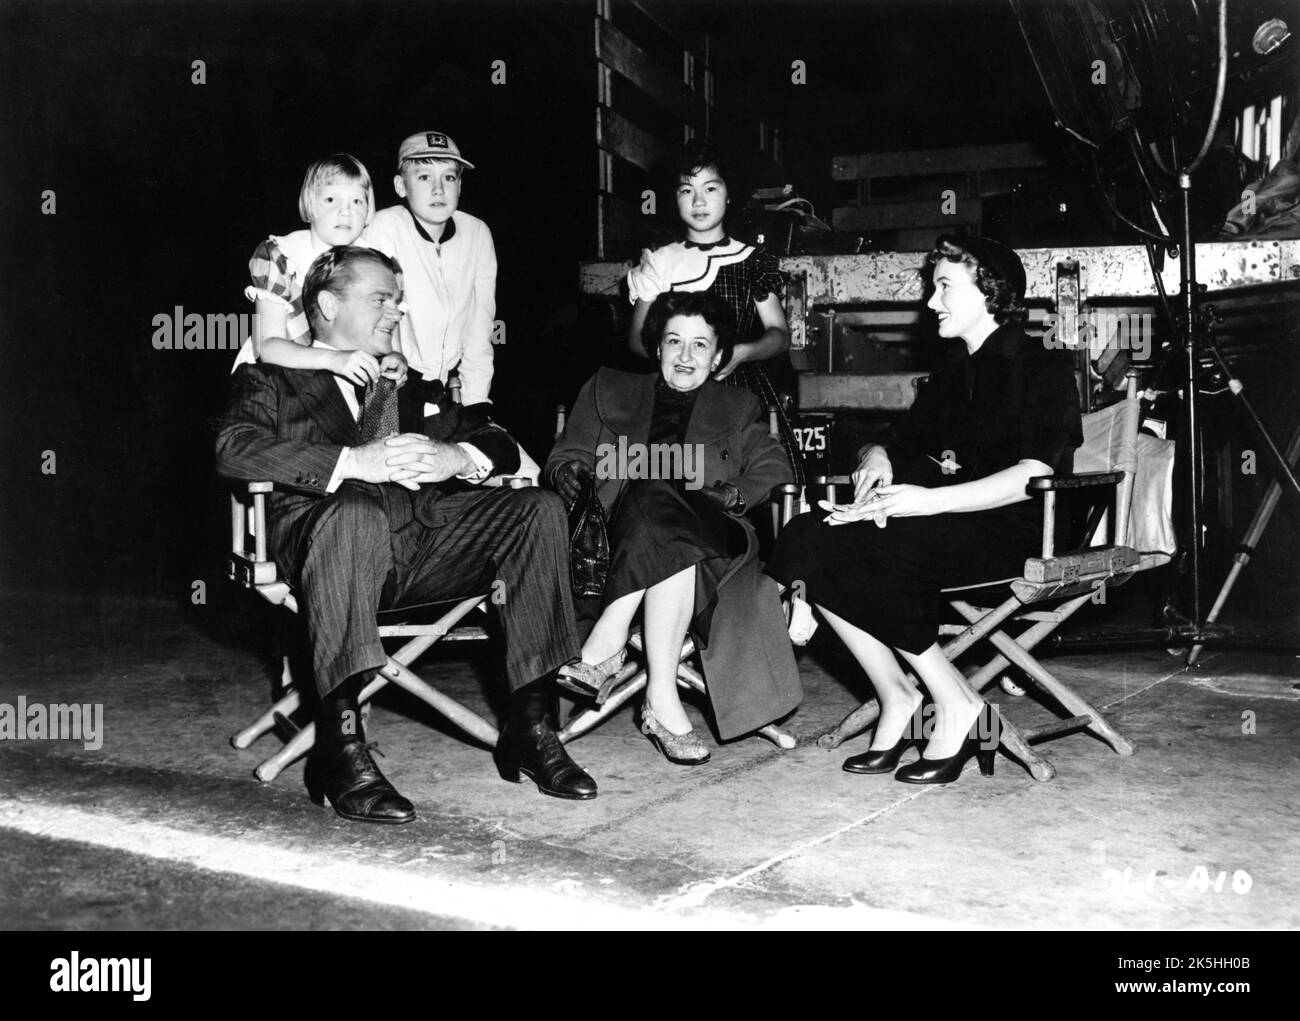 JAMES CAGNEY with his two adopted children CASEY CAGNEY and JAMES CAGNEY Jr. and wife FRANCES CAGNEY on set candid with PHYLLIS THAXTER during filming of COME FILL THE CUP 1951 director GORDON DOUGLAS novel Harlan Ware screenplay Ivan Goff and Ben Roberts producer Henry Blanke Warner Bros. Stock Photo